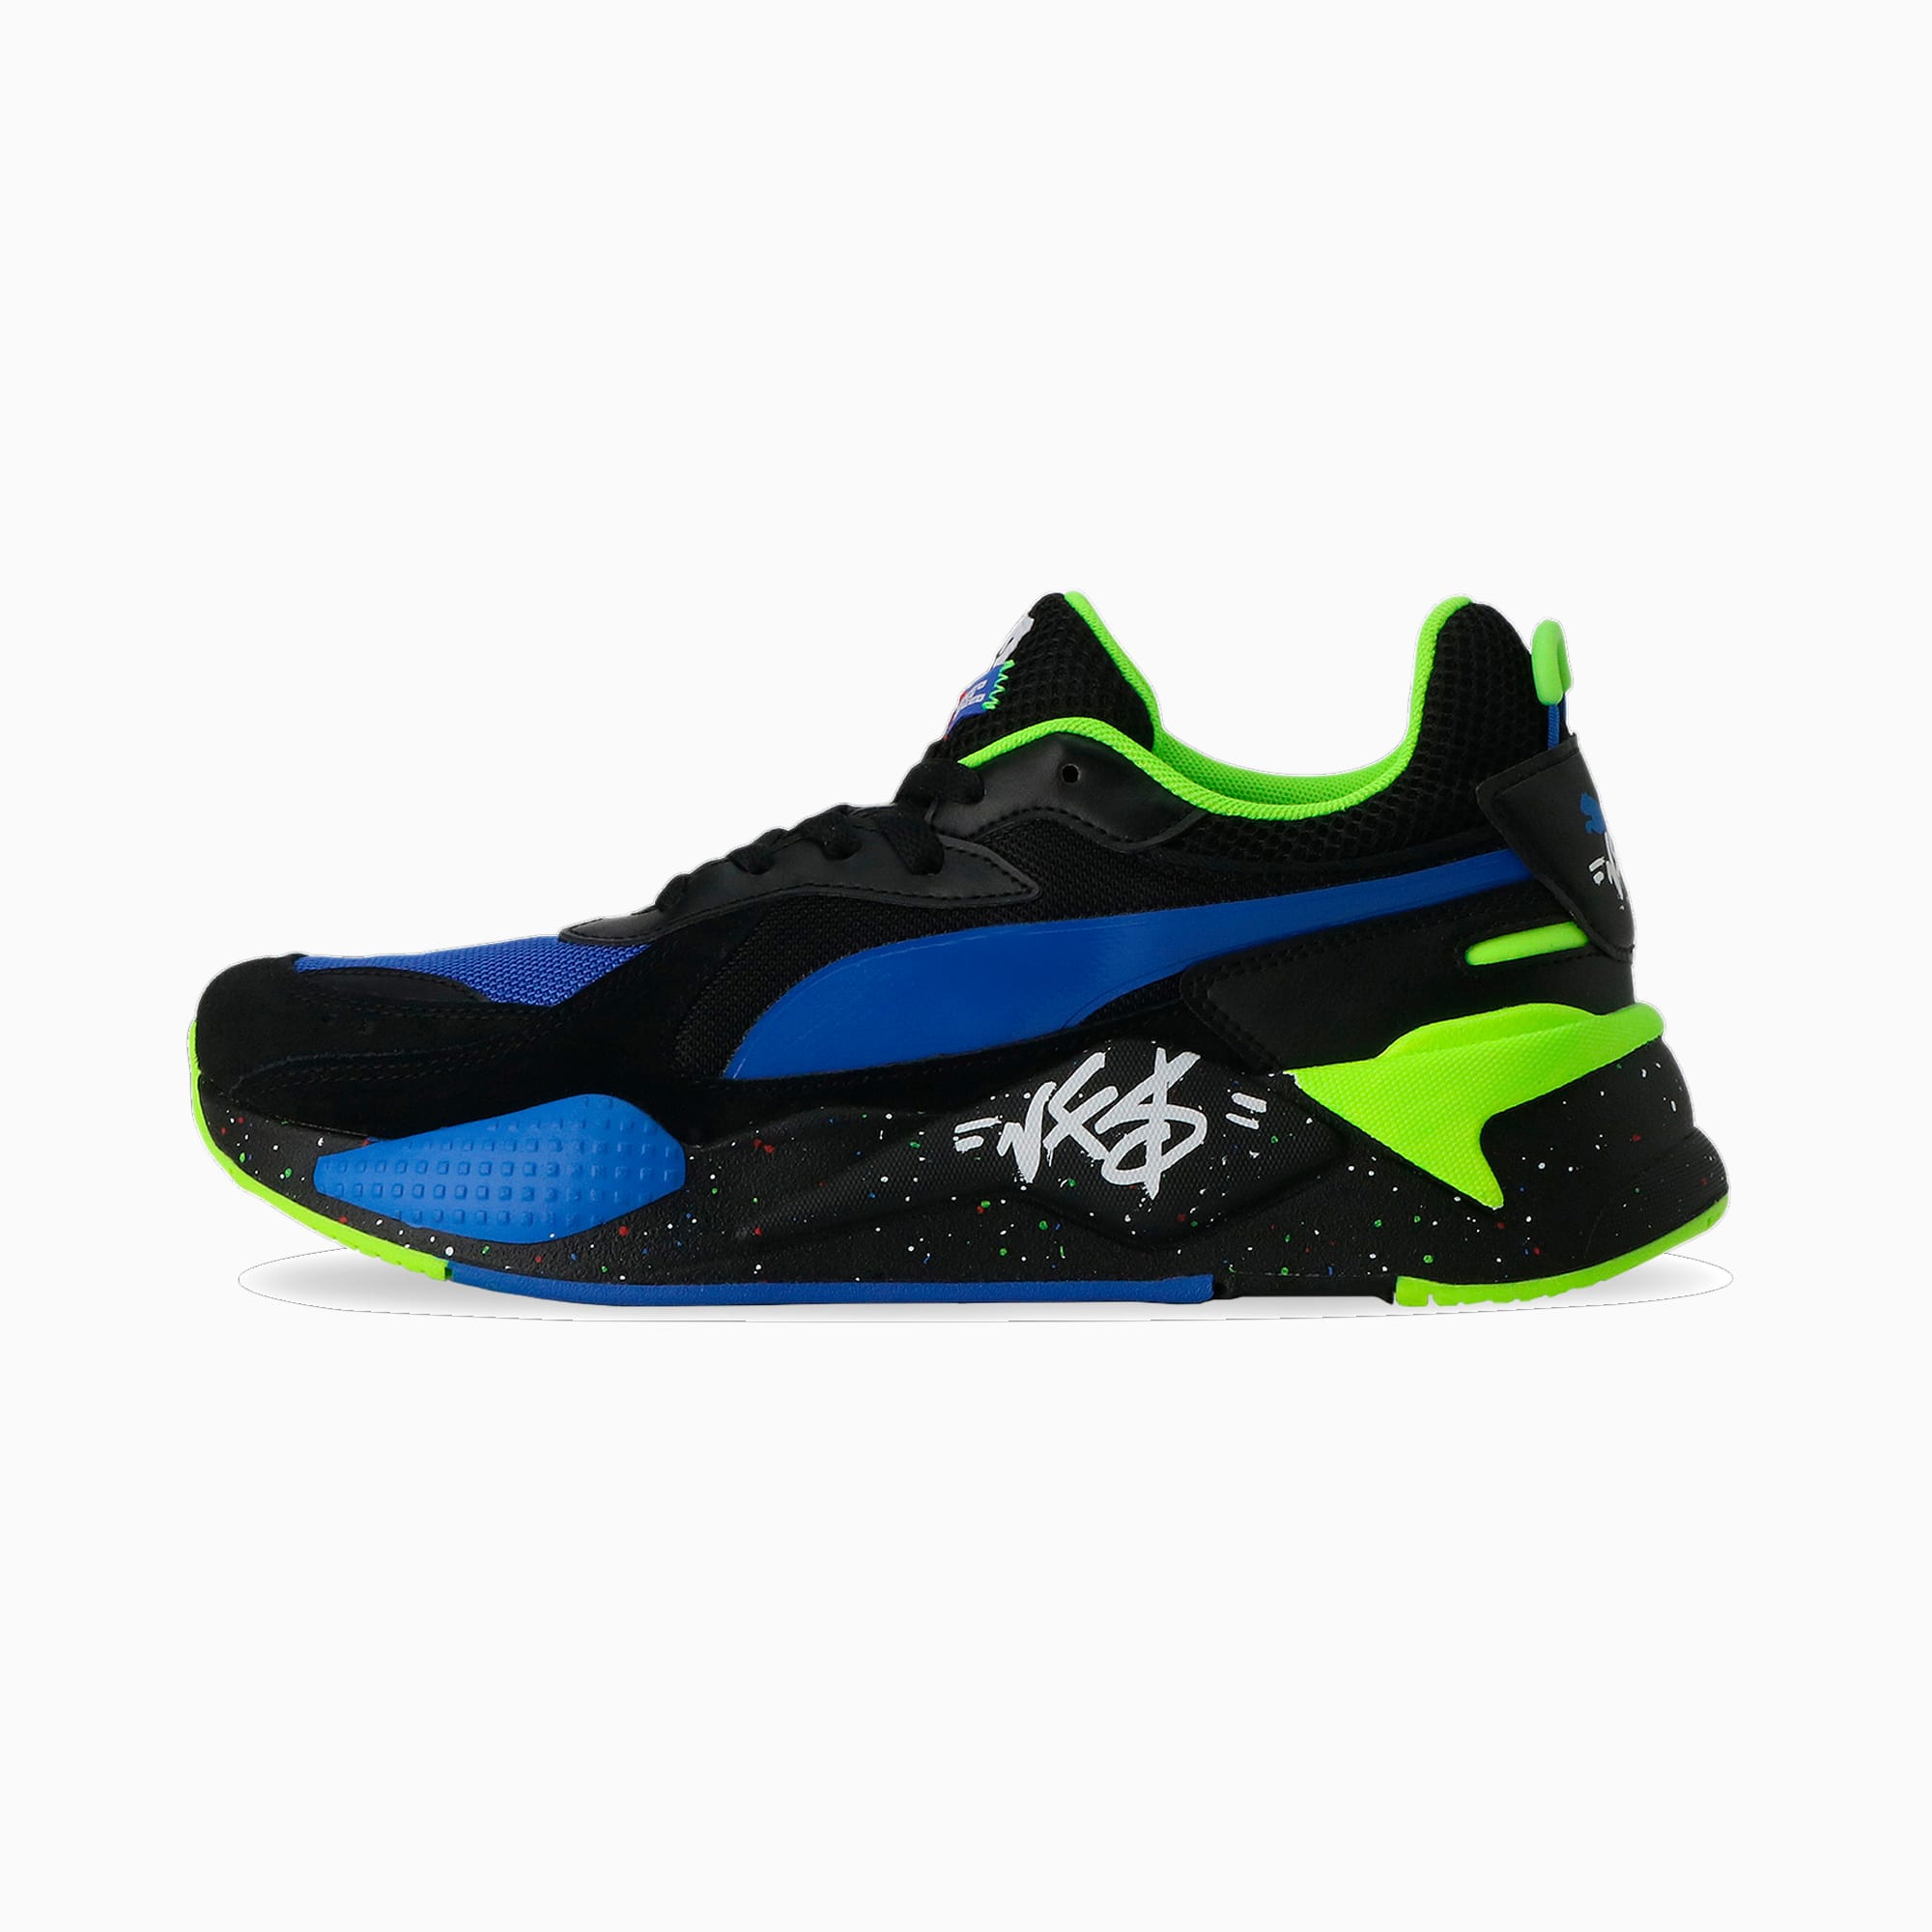 PUMA x NEED FOR SPEED RS-X Sneakers